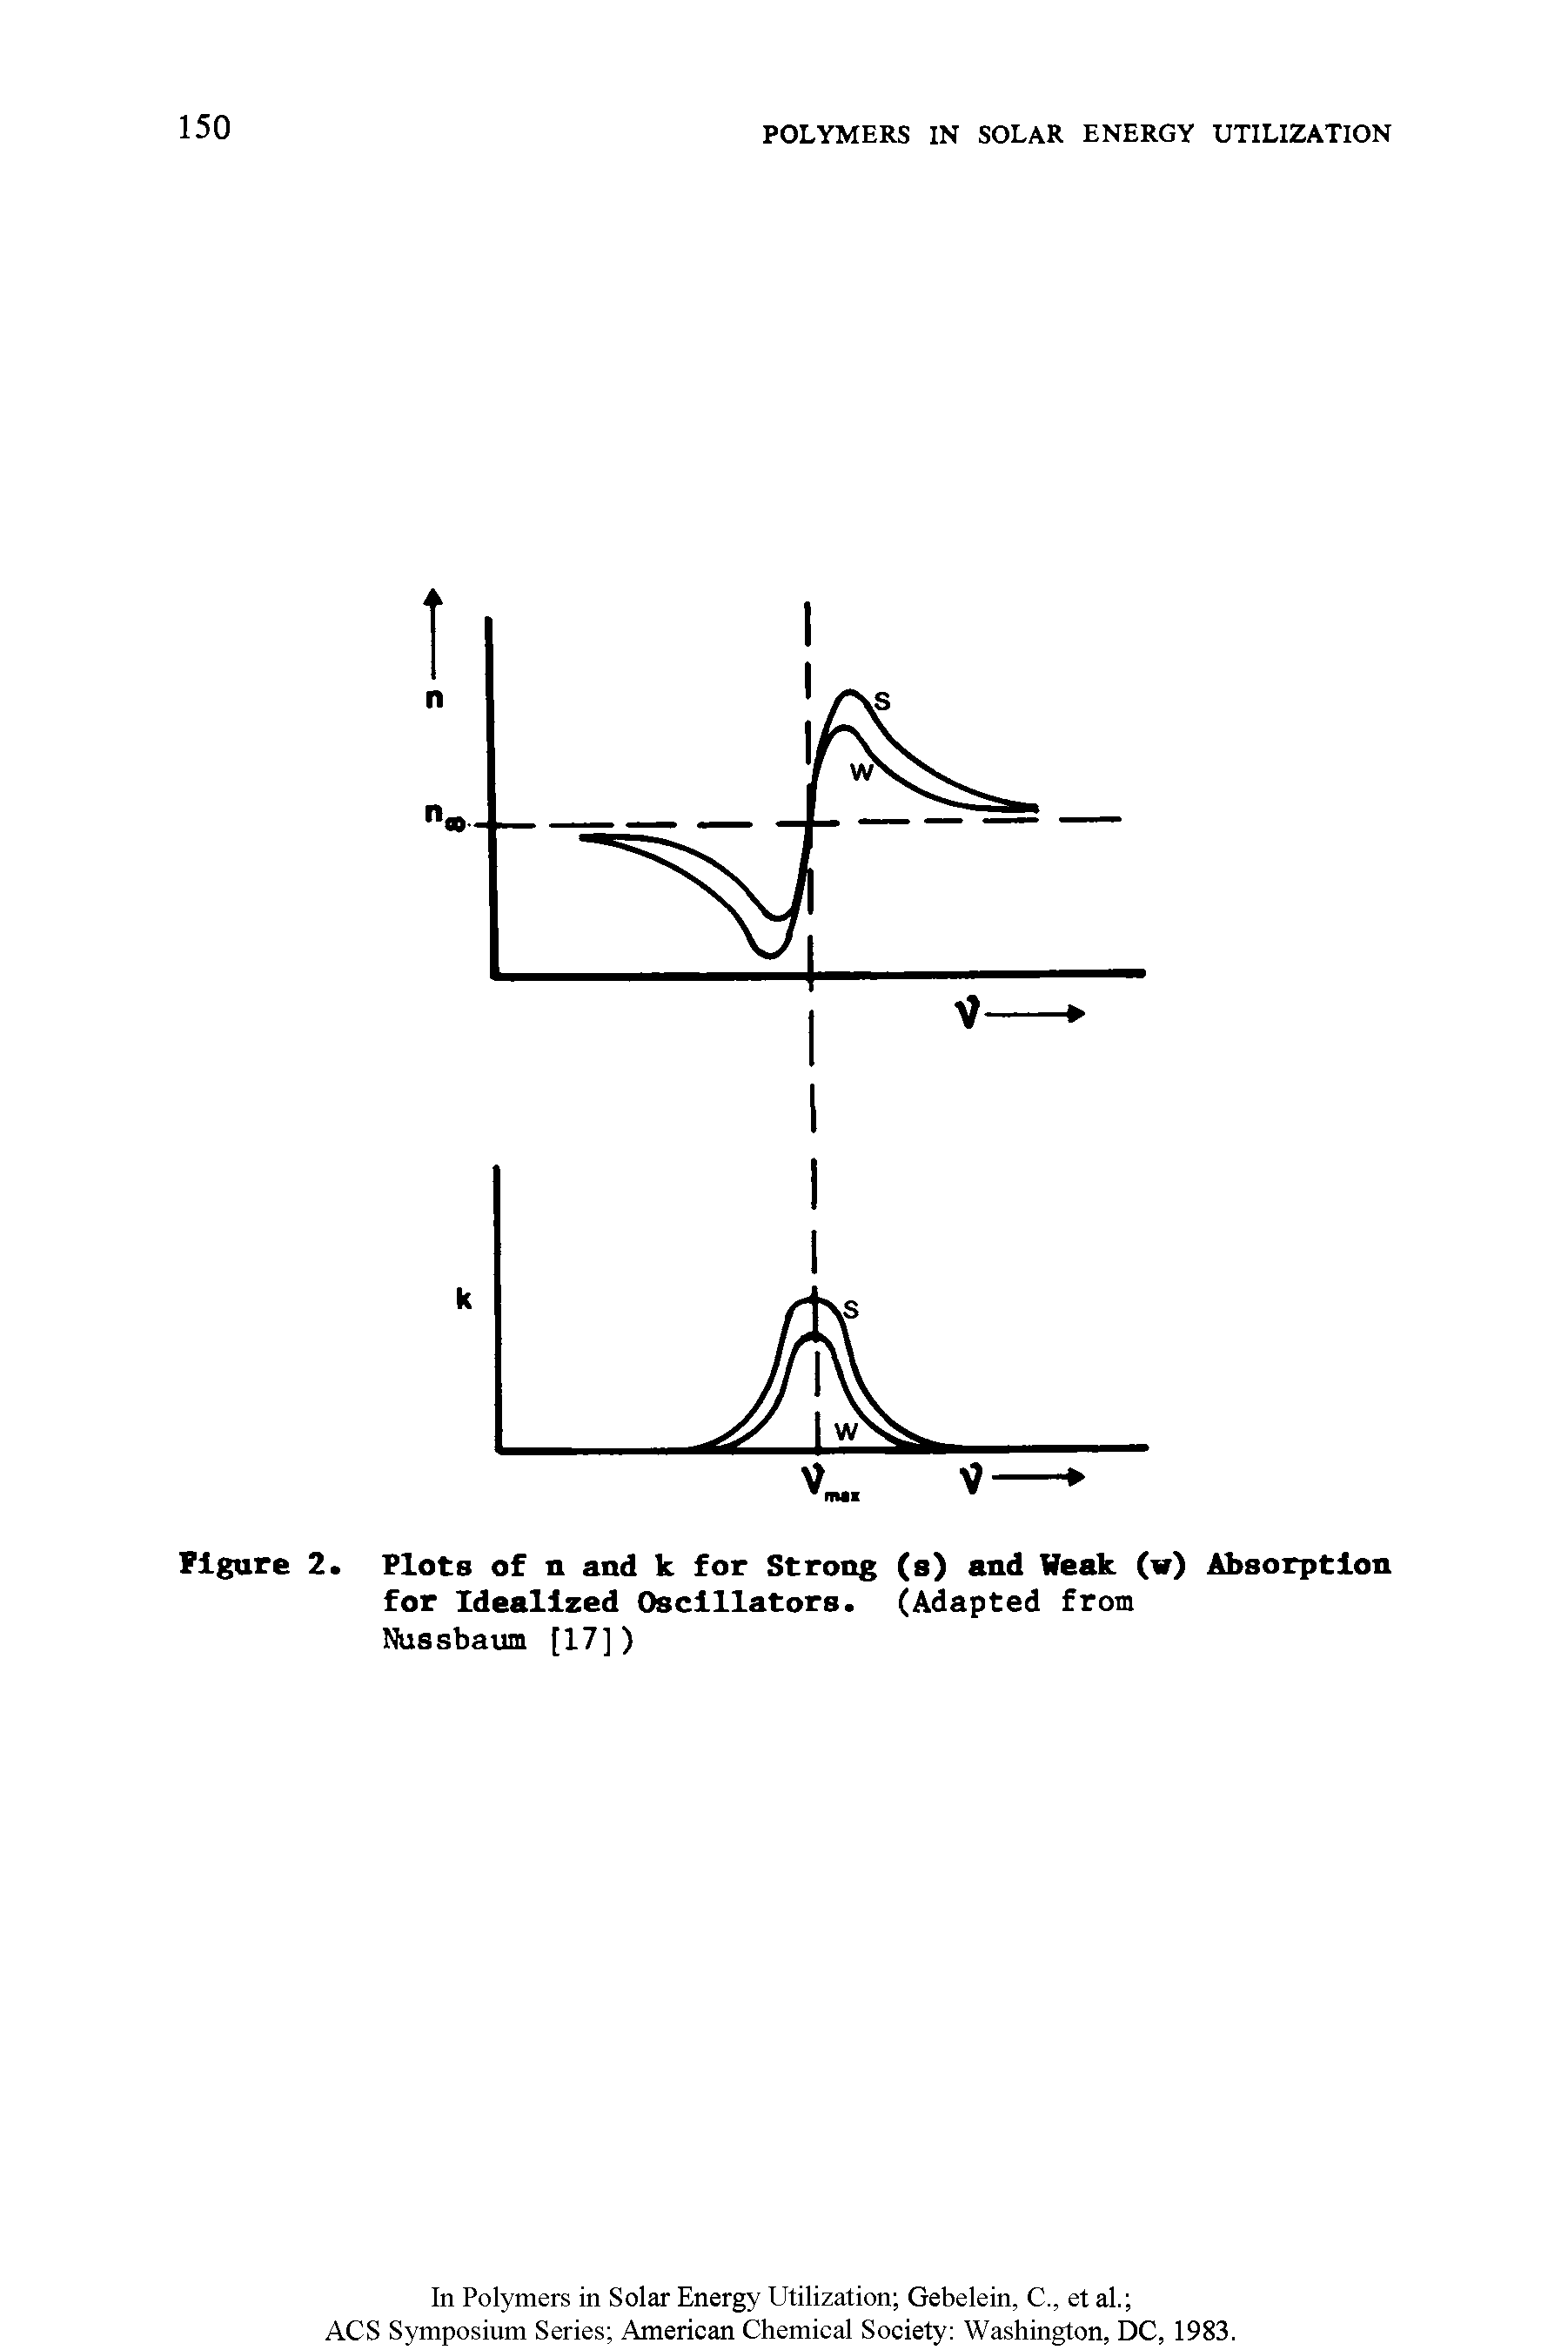 Figure 2. Plots of n and k for Strong (s) and Weak (w) Absorption for Idealized Oscillators. (Adapted from Nussbaum [17])...